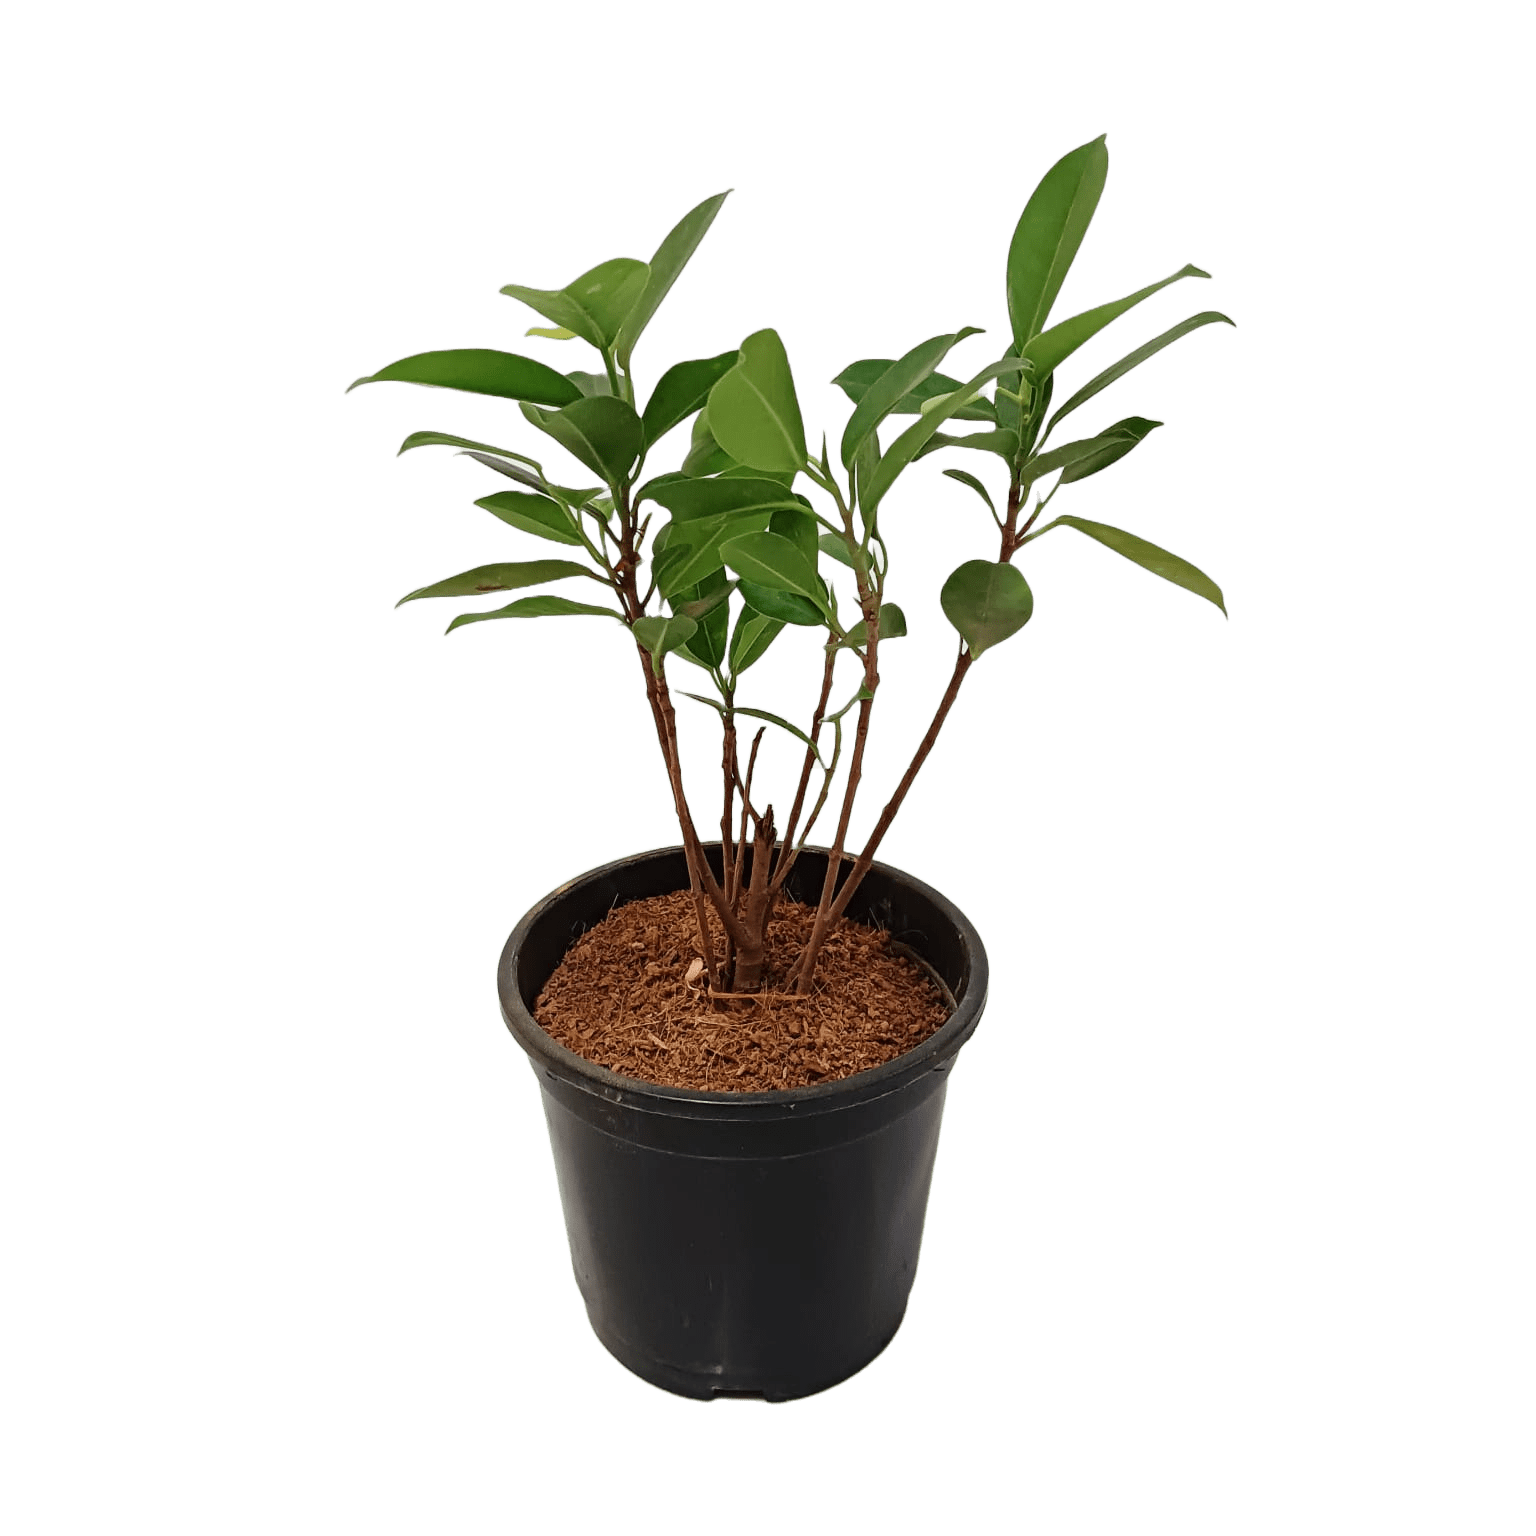 Shop Panda Fig online - easy plant shopping, Buy Ficus Panda for home and office online, Purchase Panda Fig tree with just a click, Ficus Panda online - bring unique nature to your space, Order your Panda Fig plant hassle-free